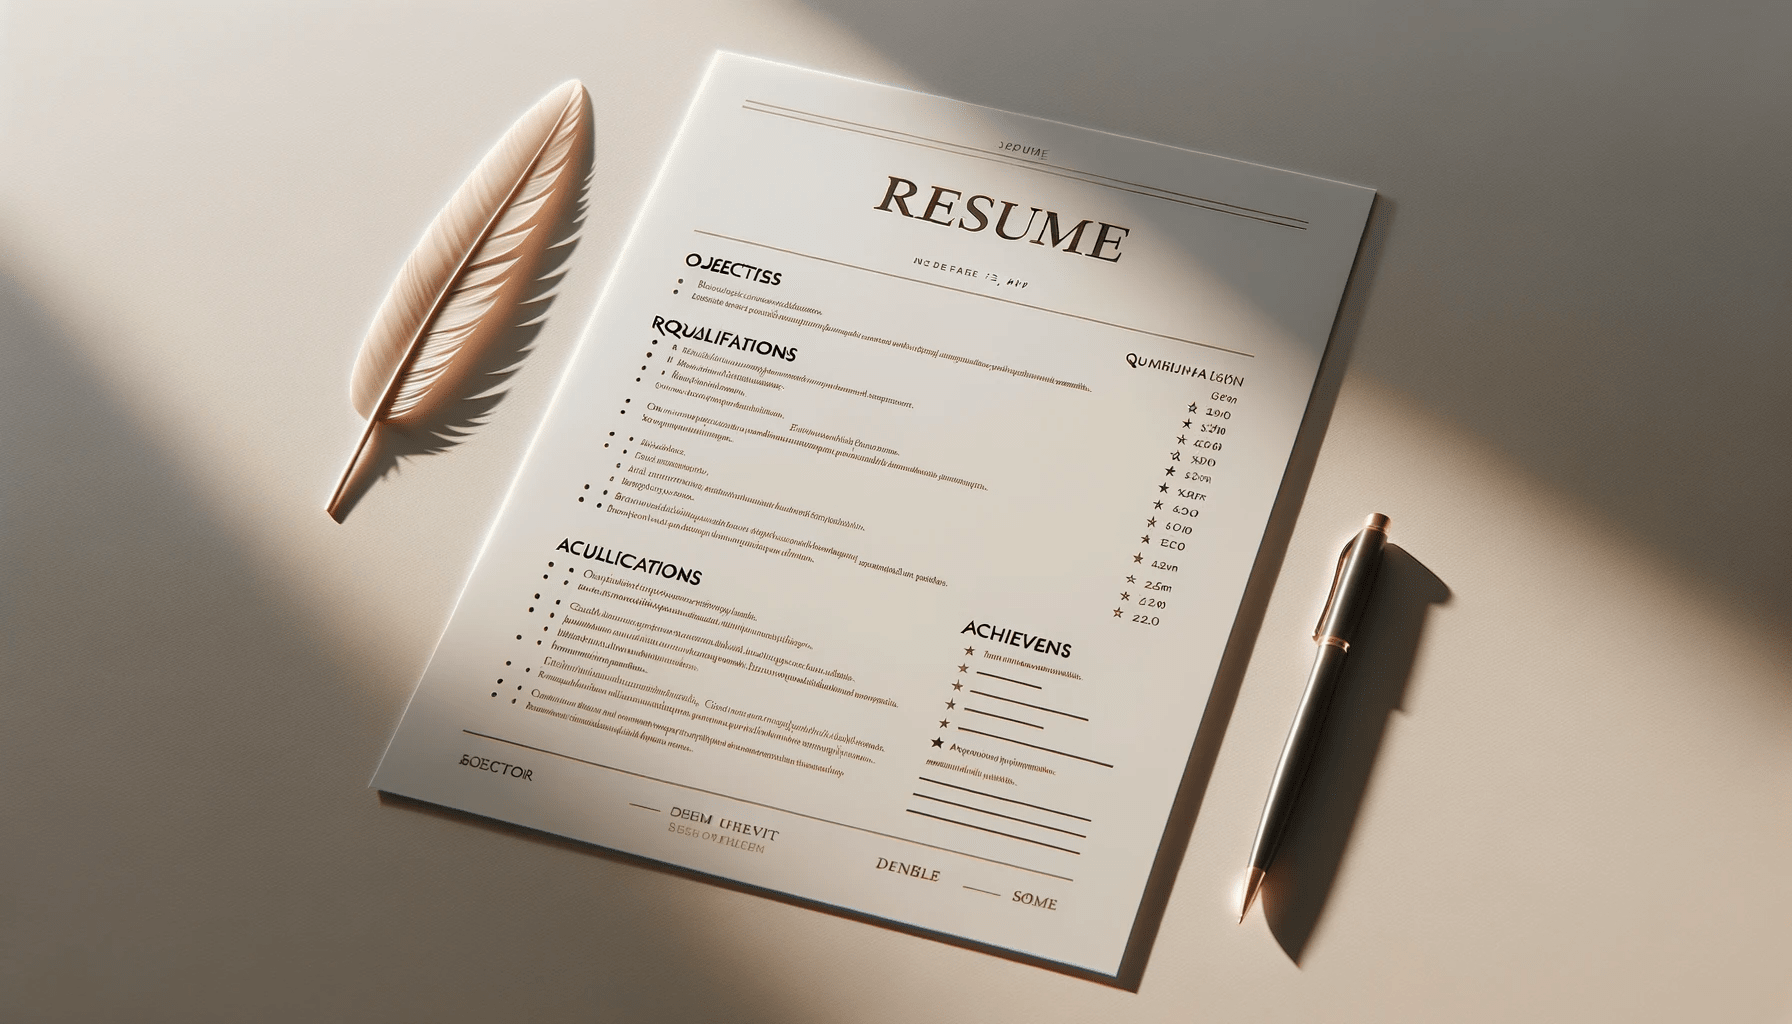 How Long Should a Resume Be